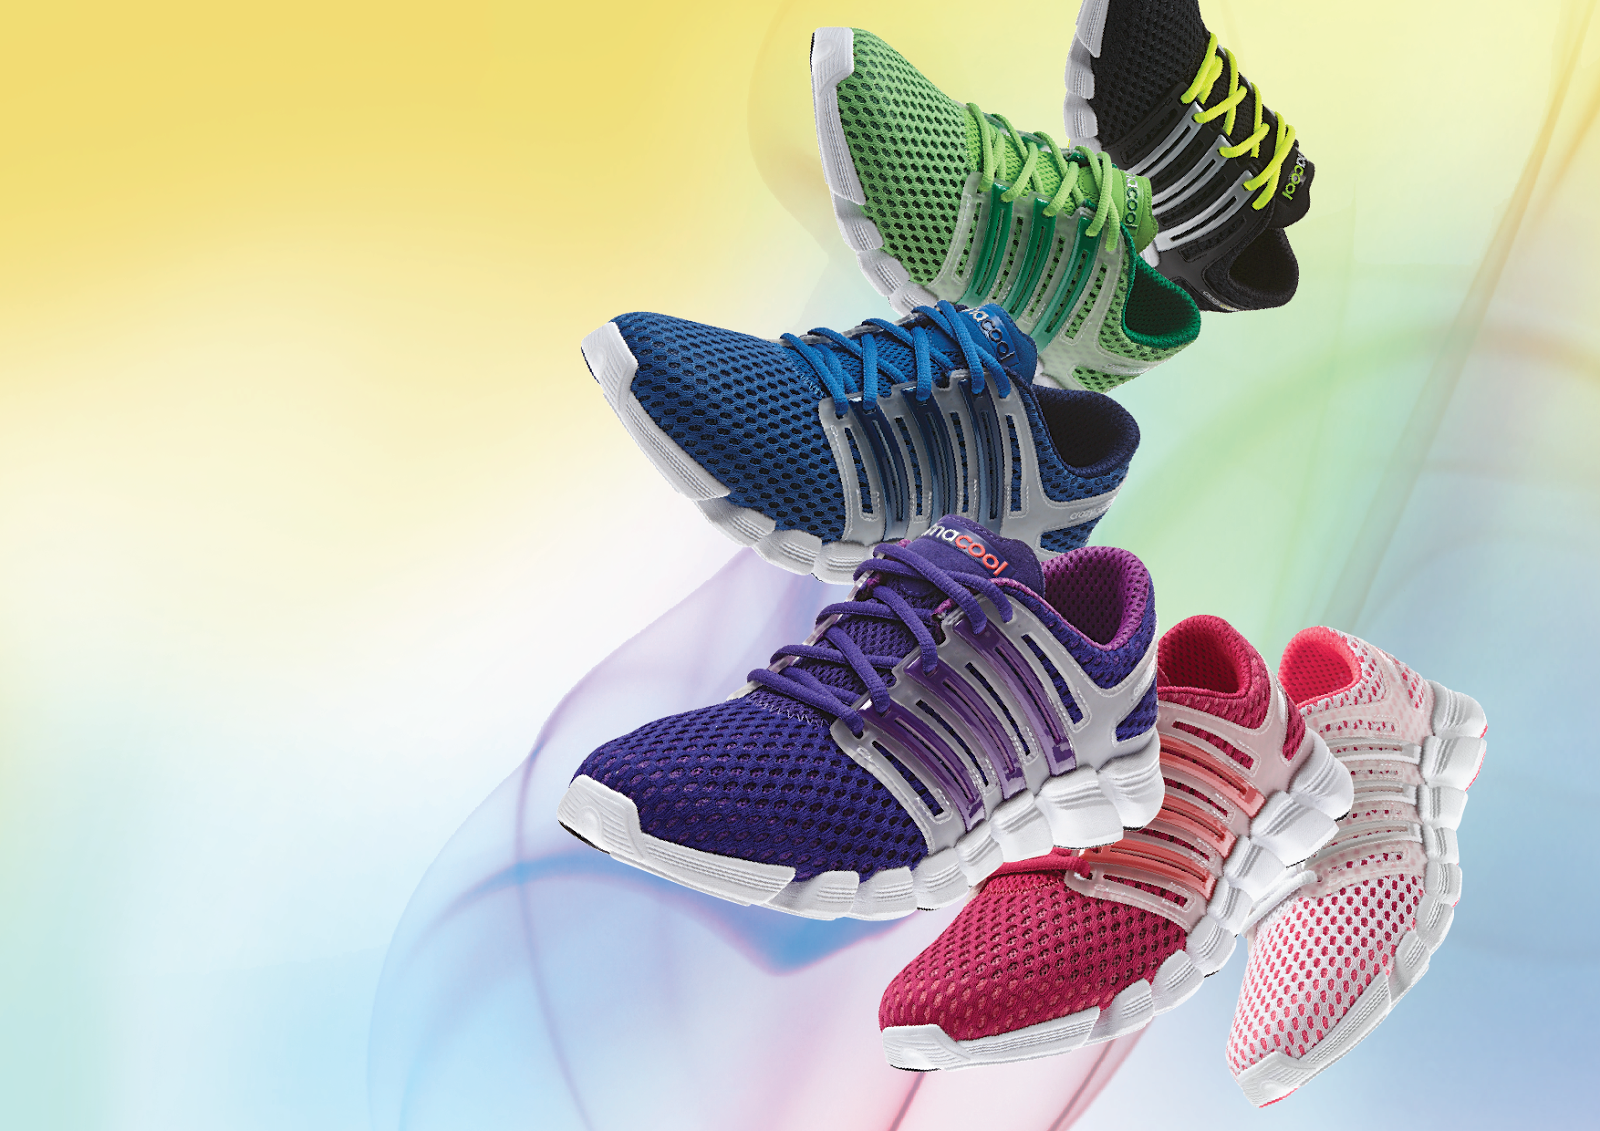 adidas climacool crazy running shoes